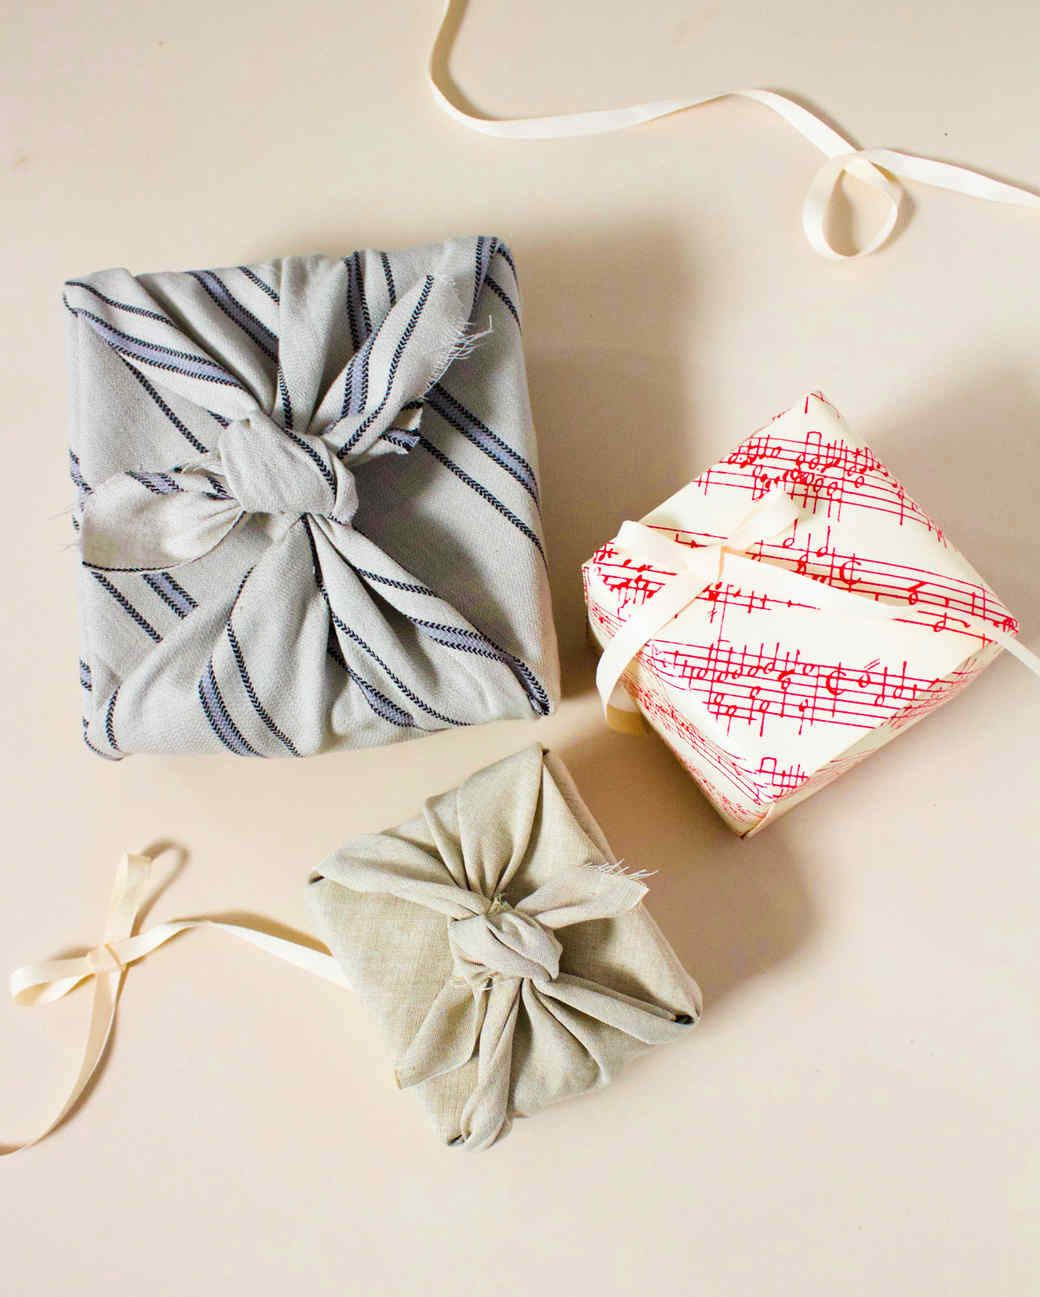 How To Wrap A Baby Gift Without Wrapping Paper
 How to Wrap a Gift Without Tape